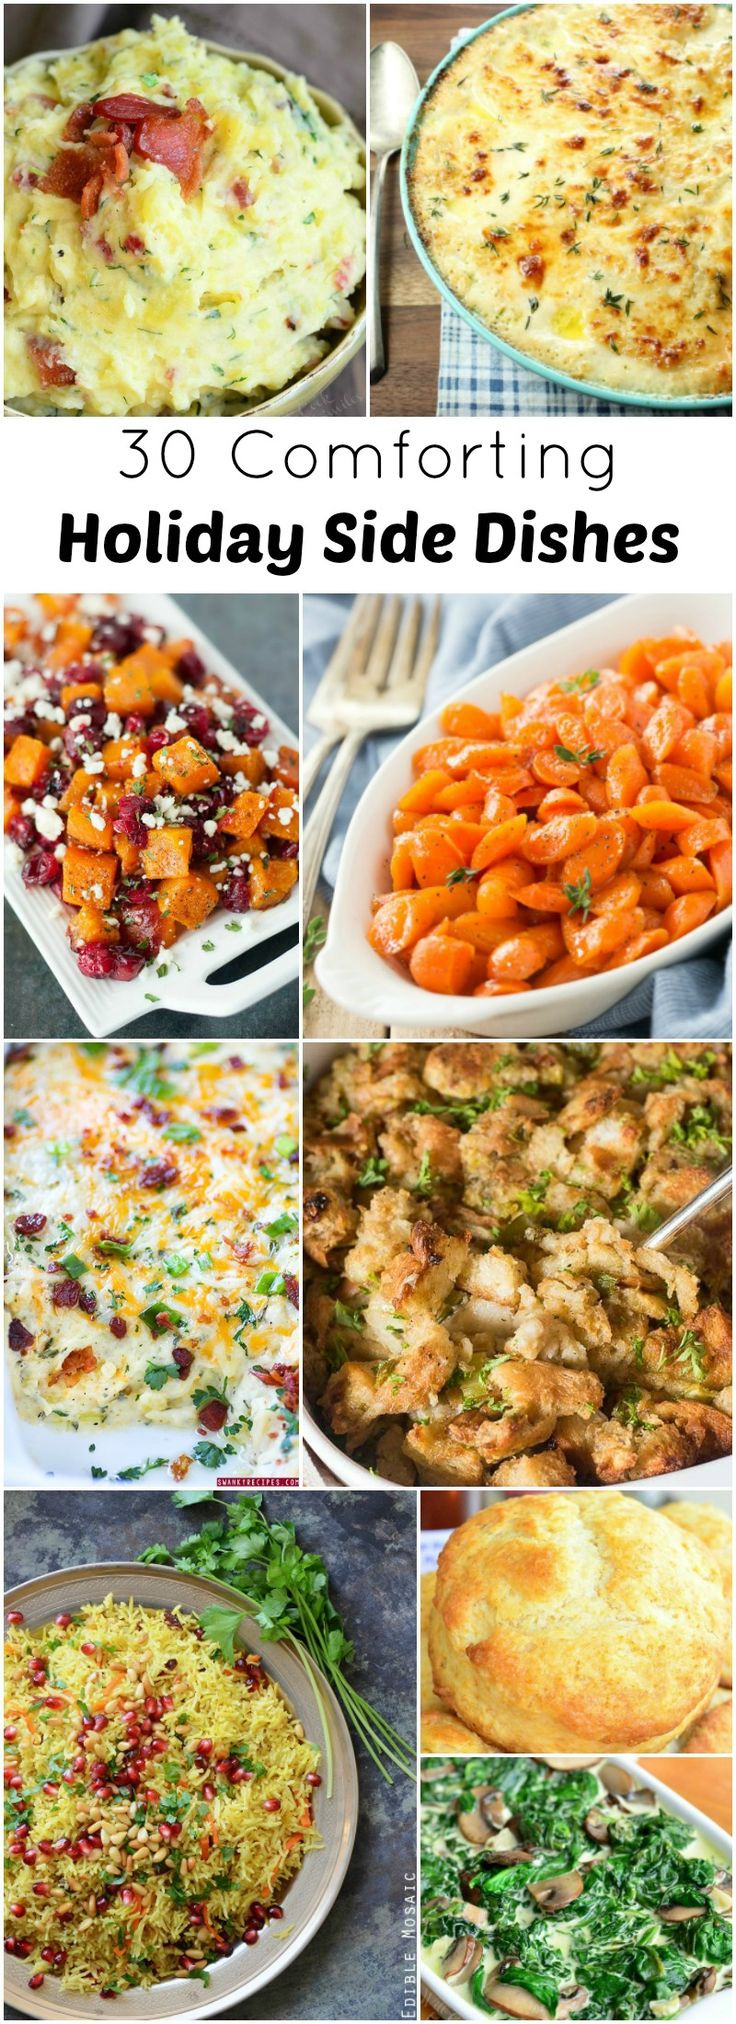 Best Christmas Side Dishes
 Best 20 Holiday Side Dishes ideas on Pinterest